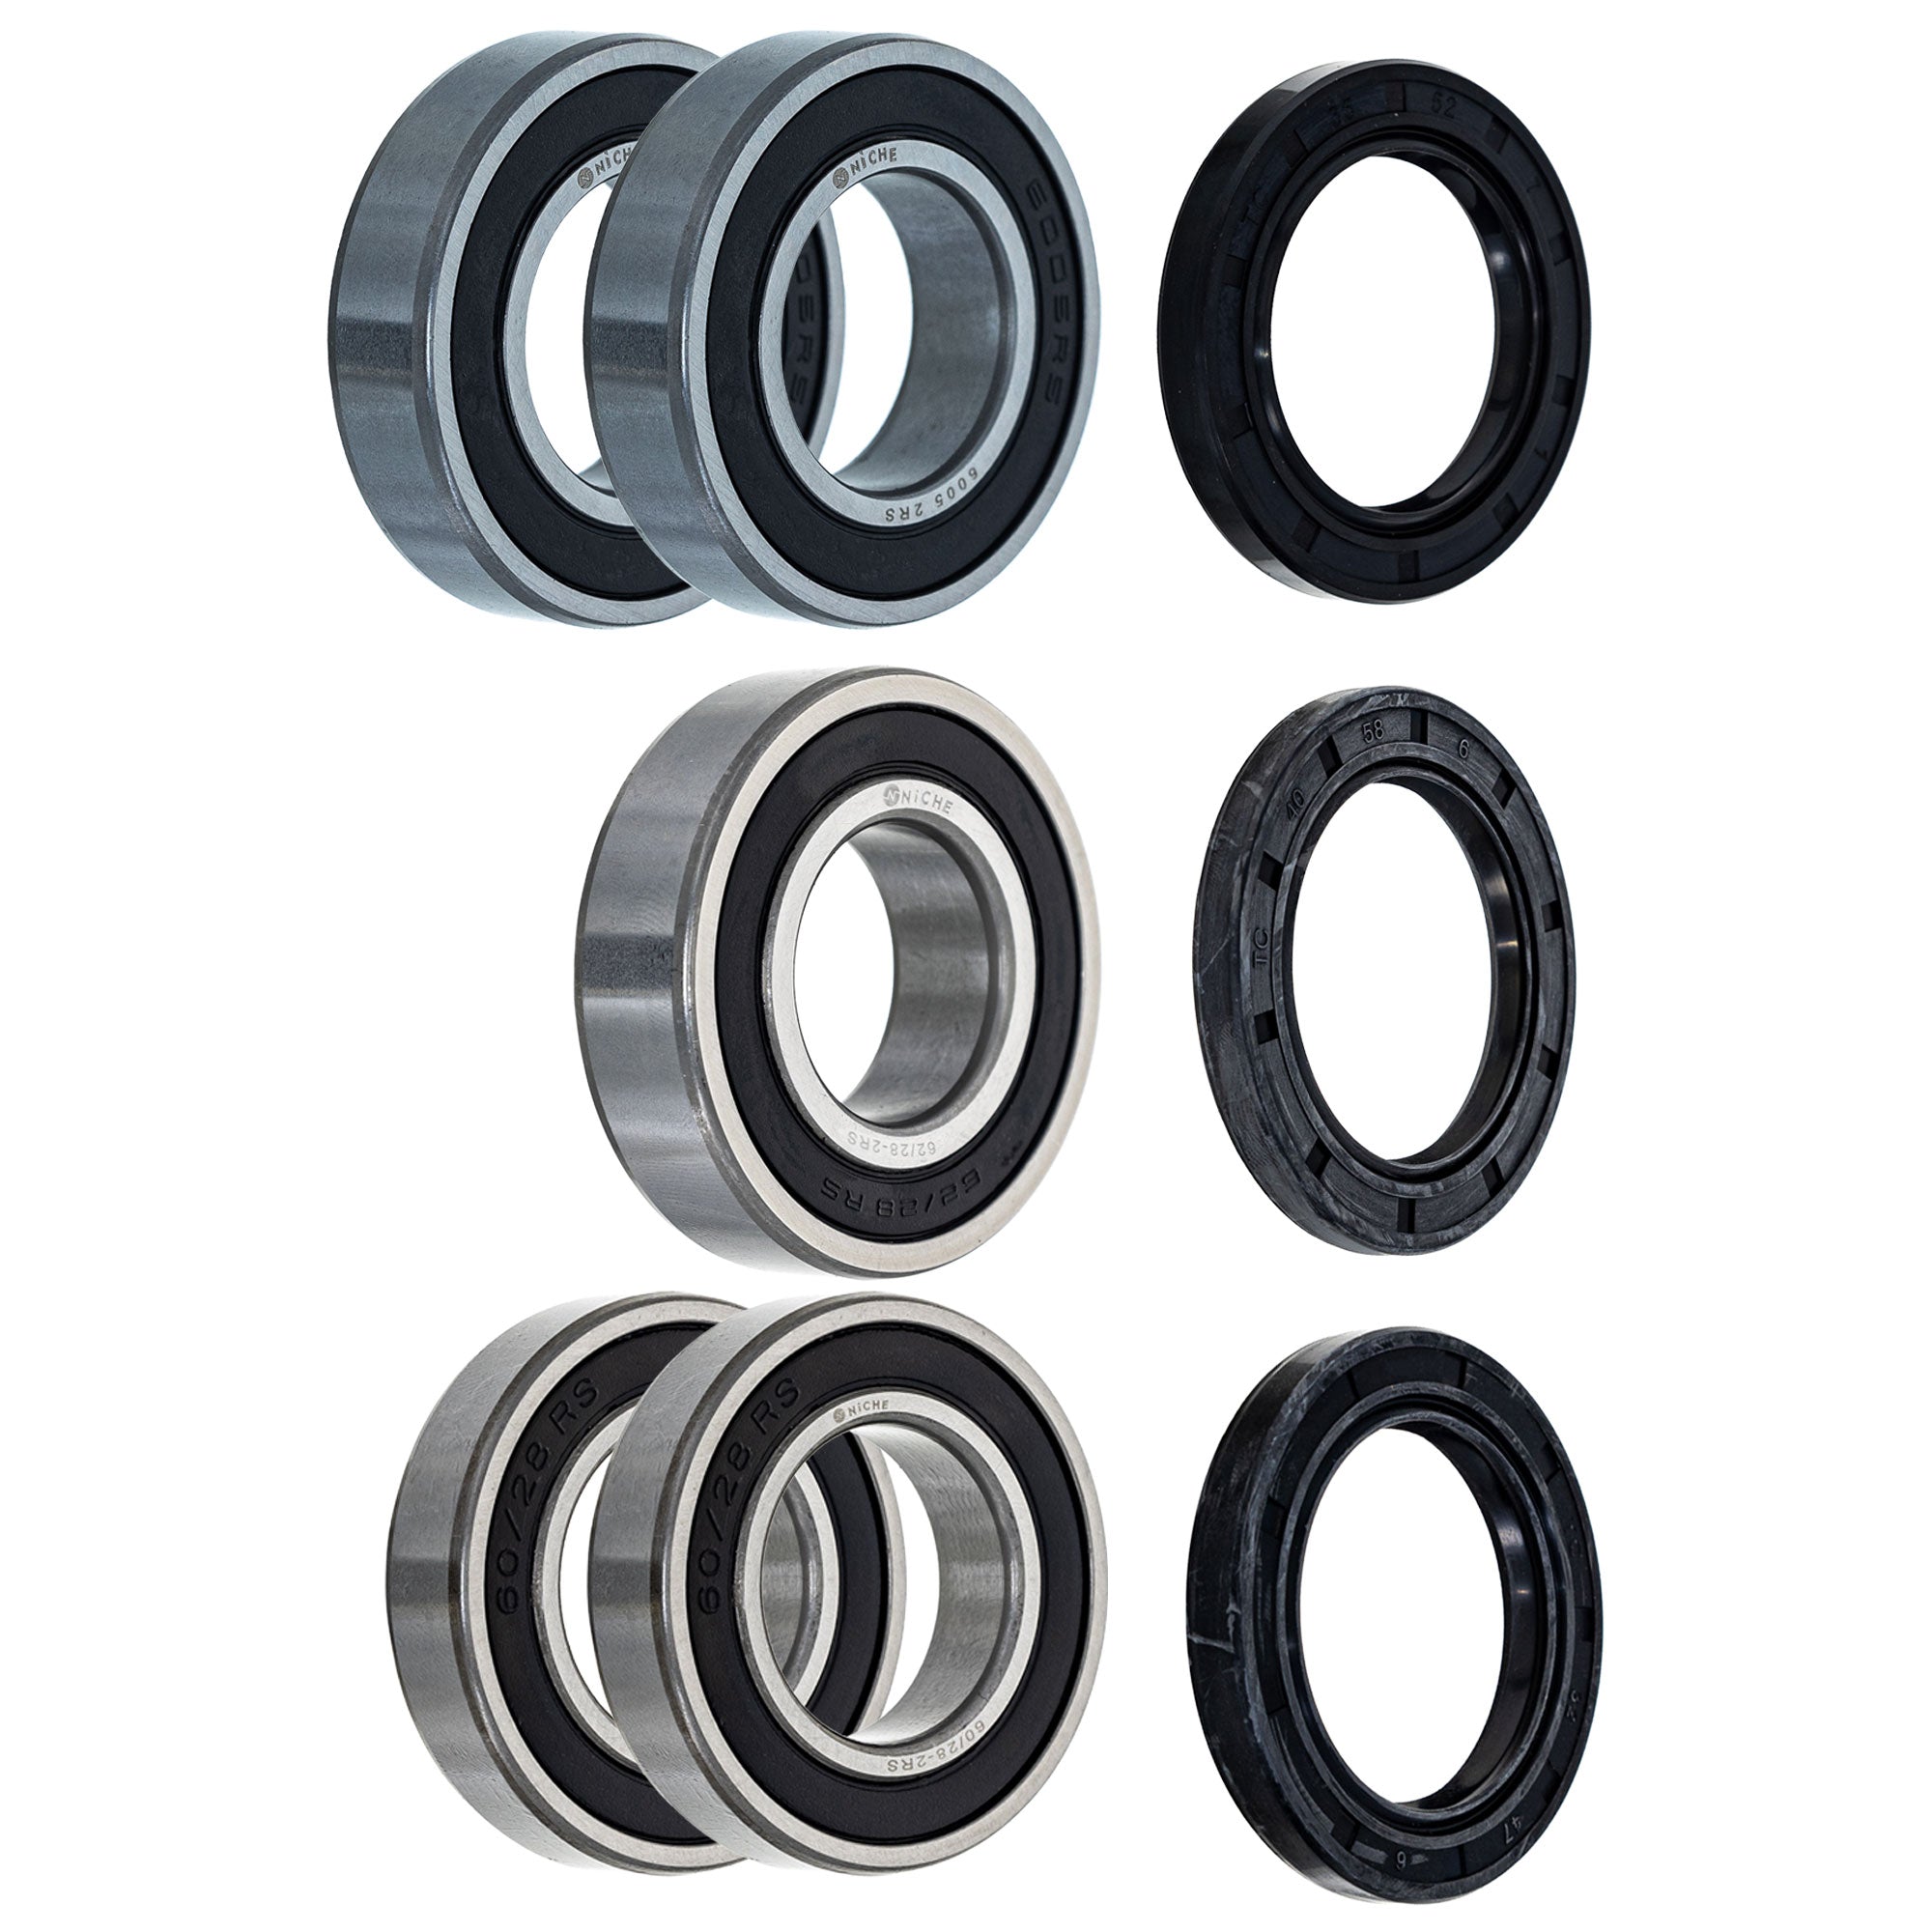 Wheel Bearing Seal Kit for zOTHER S1000RR S1000R HP4 NICHE MK1008466